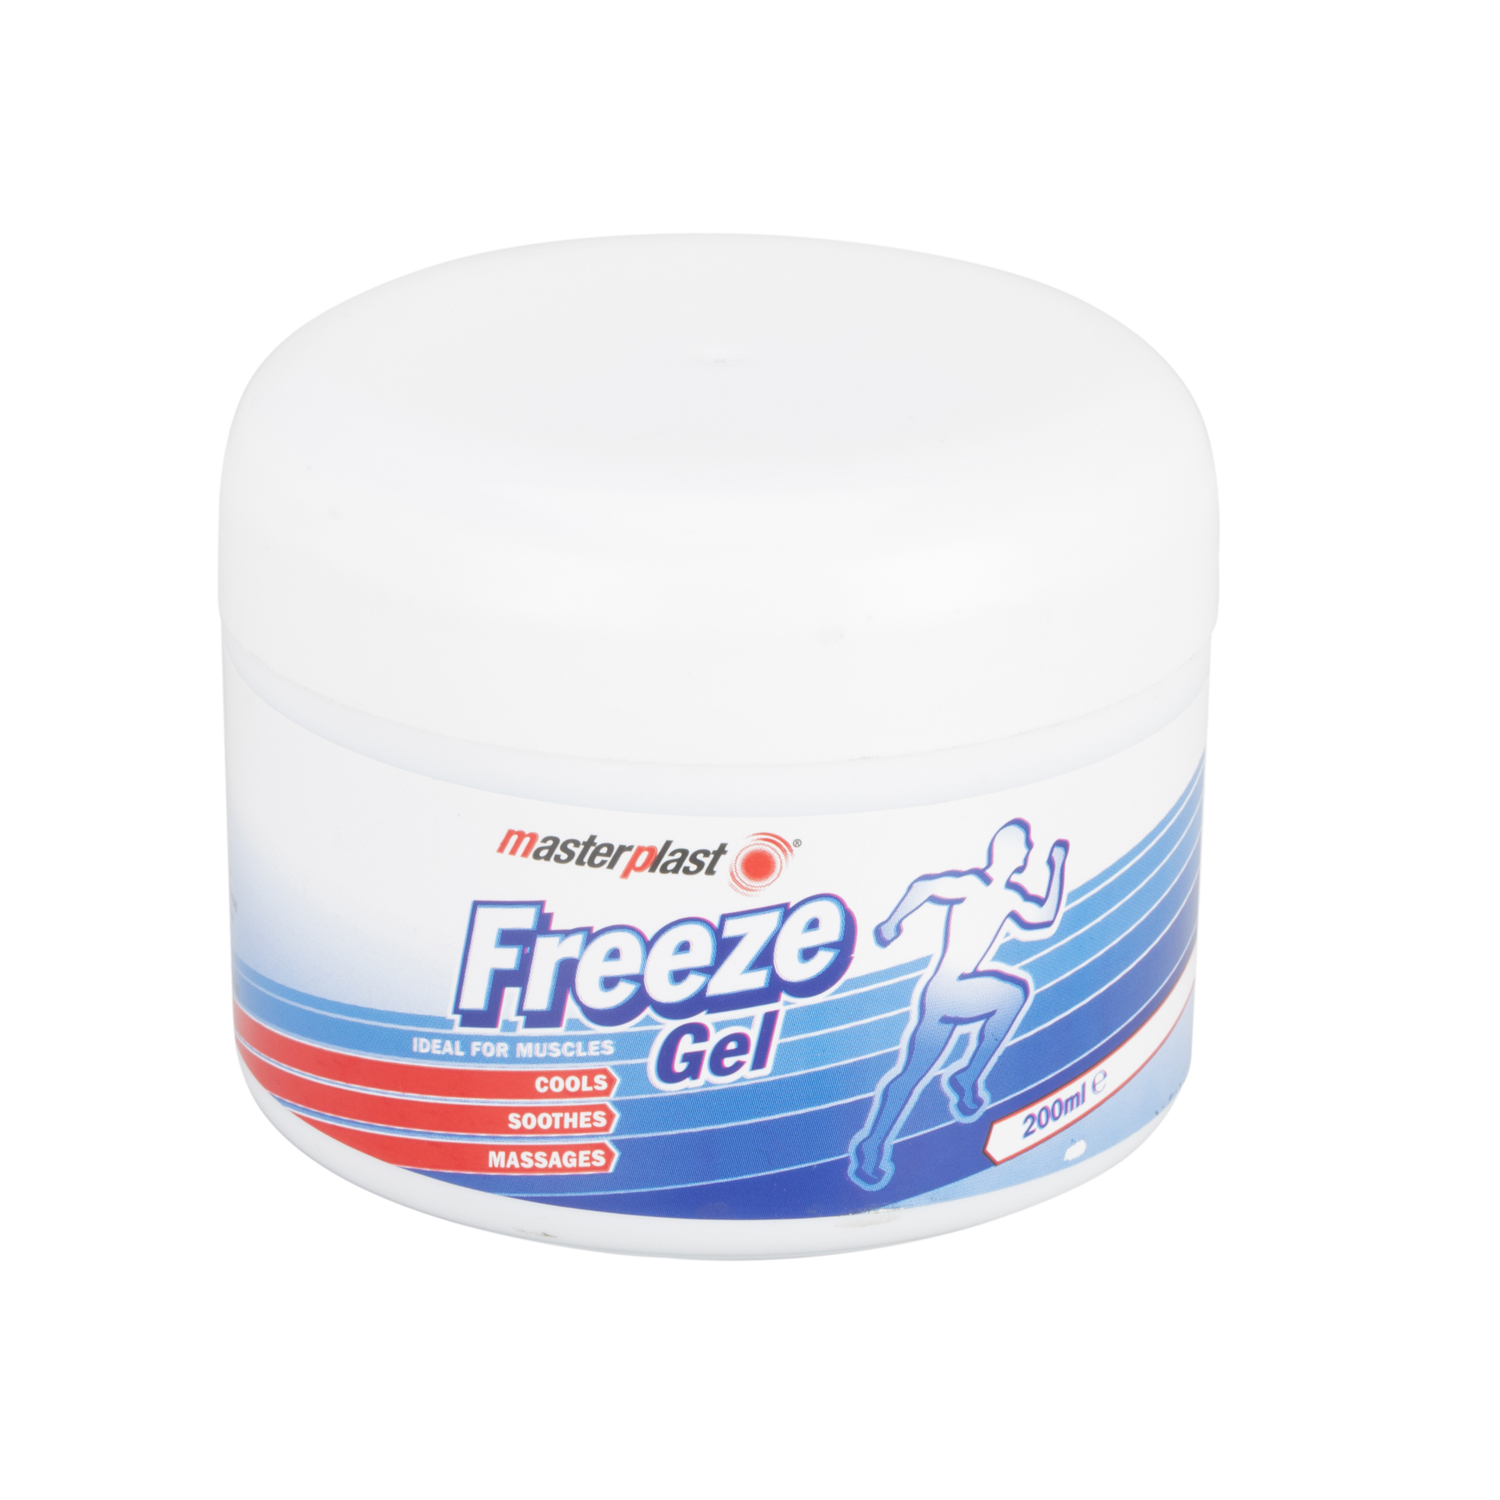 Masterplast Freeze Gel for Muscles Image